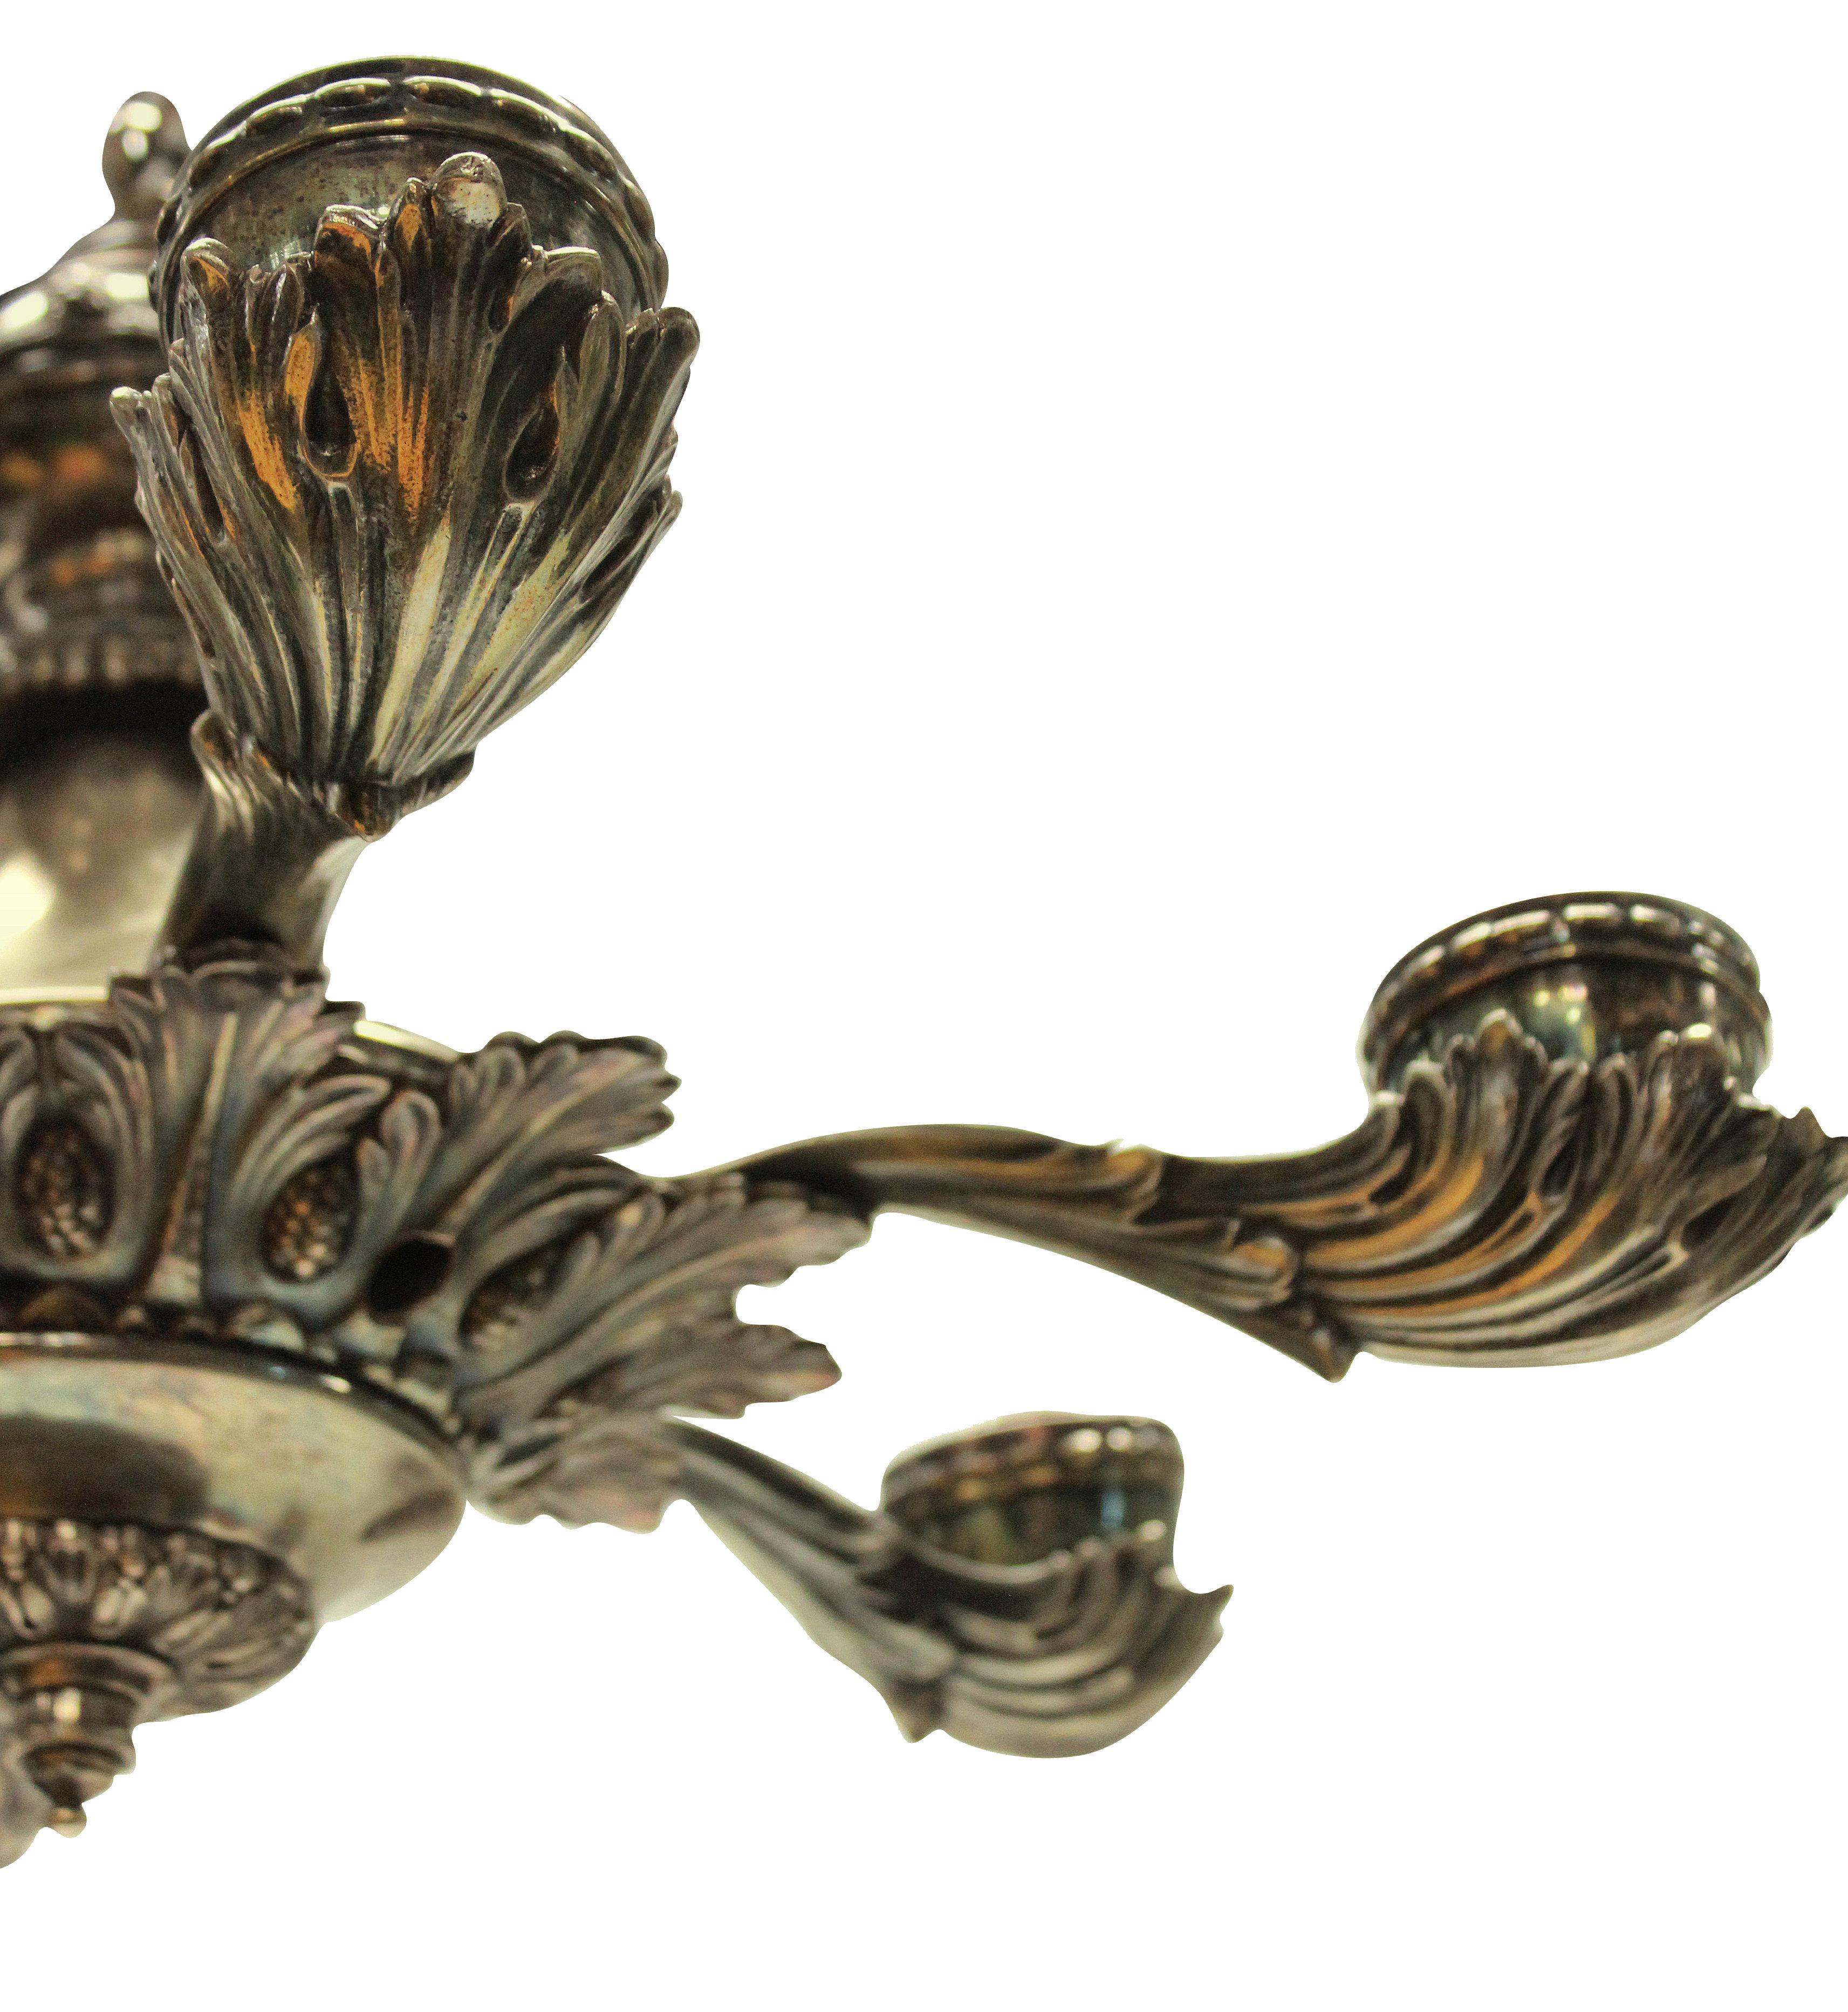 An English silver plated Greek Revival chandelier of good crisp detail, depicting acanthus leaves.